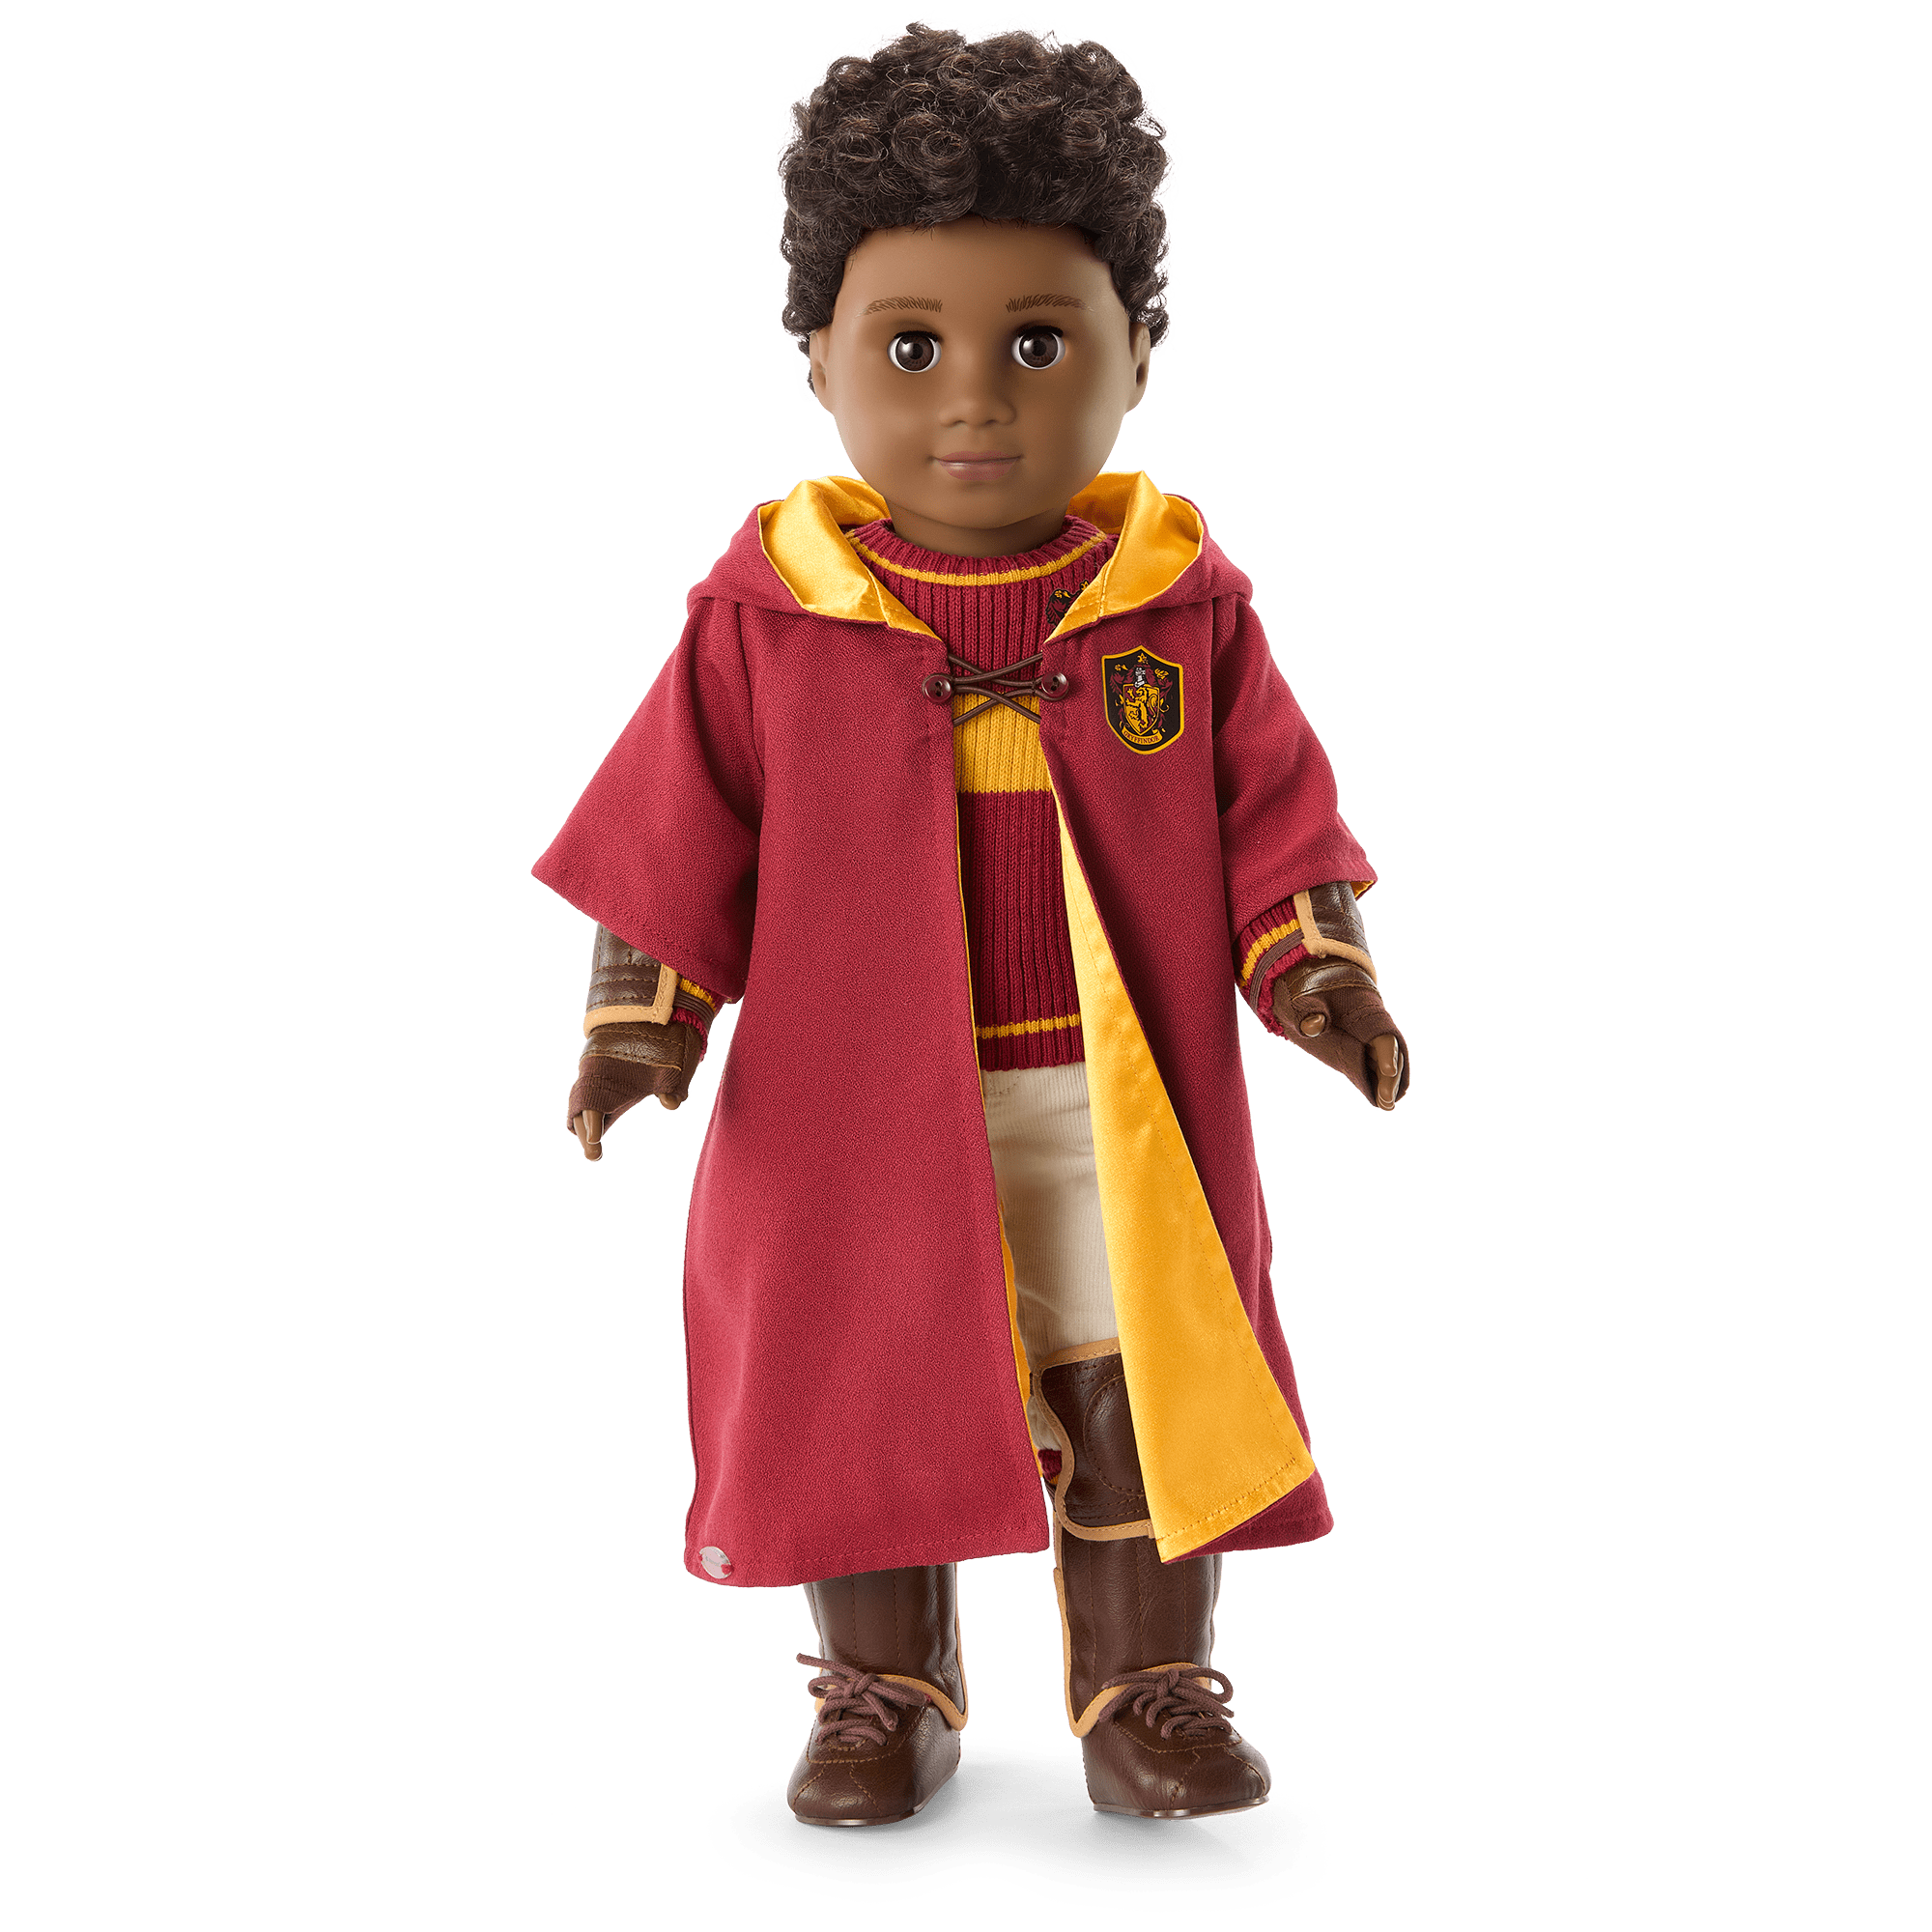 Harry Potter Quidditch Uniform Doll 10 with Snitch